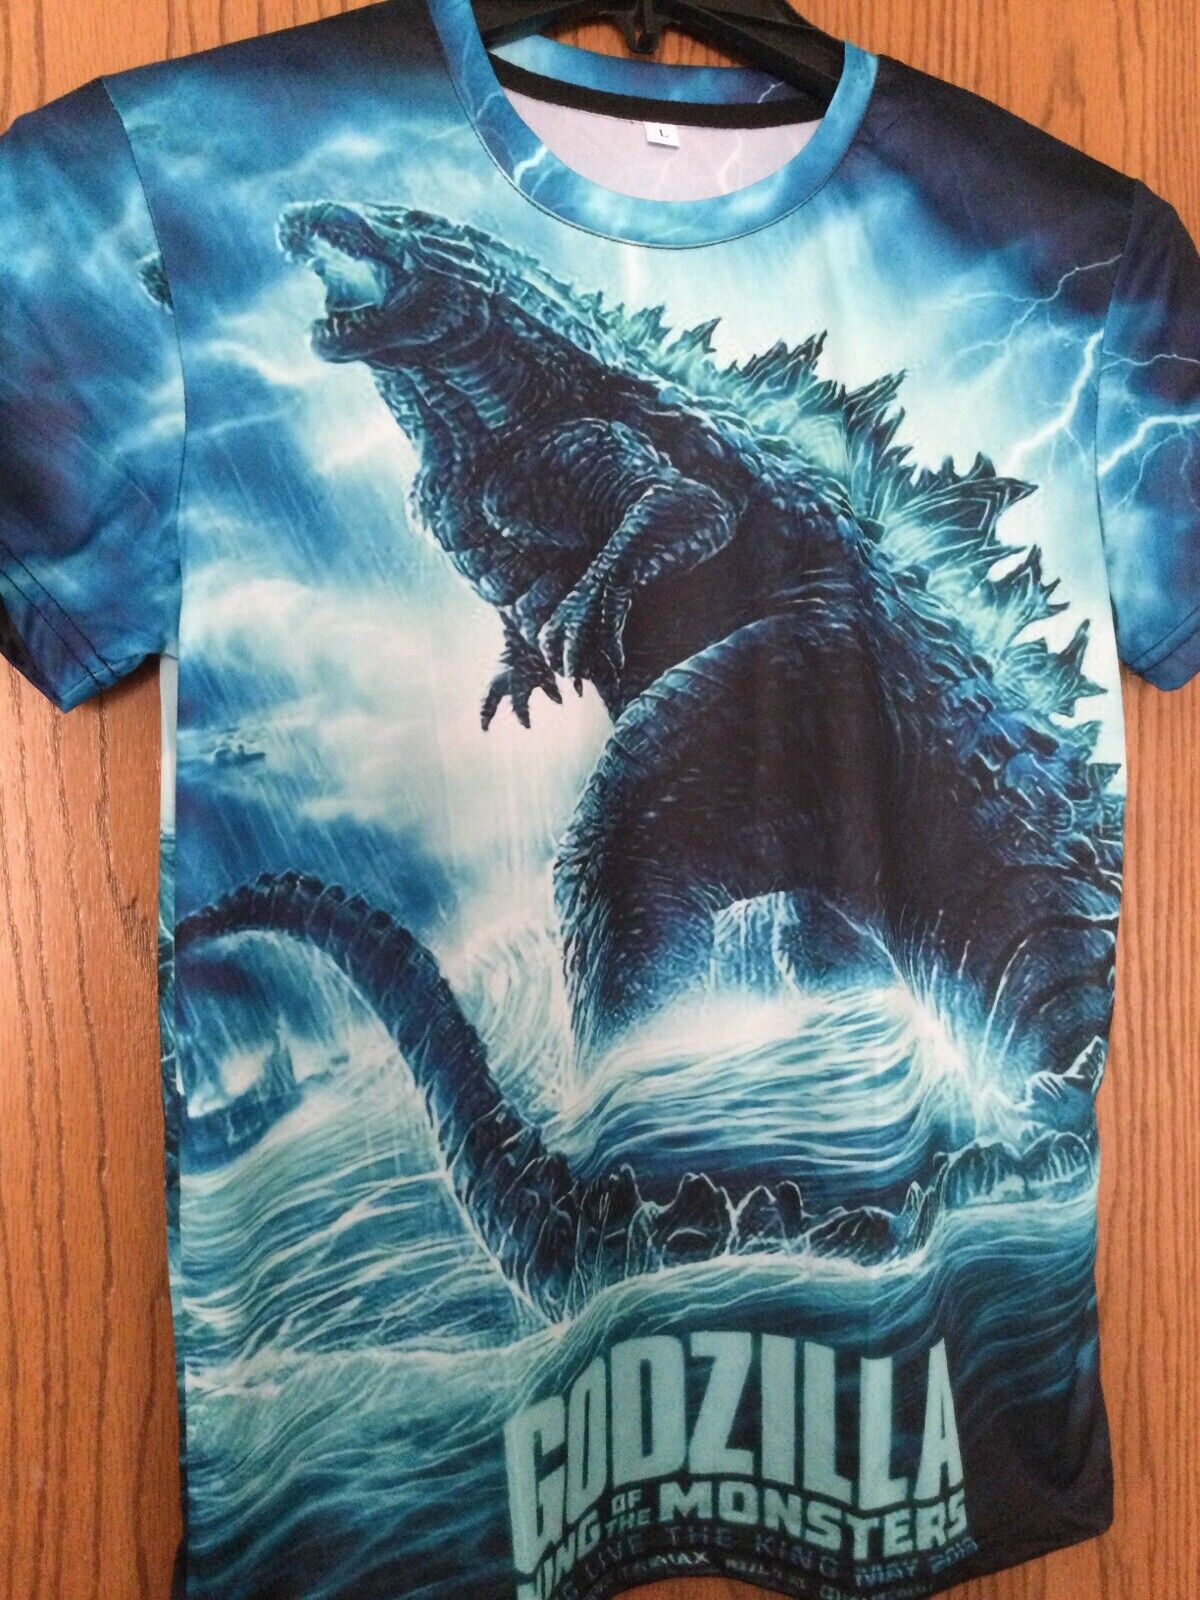 Godzilla - “King Of The Monsters” - May 2019 - Blue Shirt - L - Polyester.